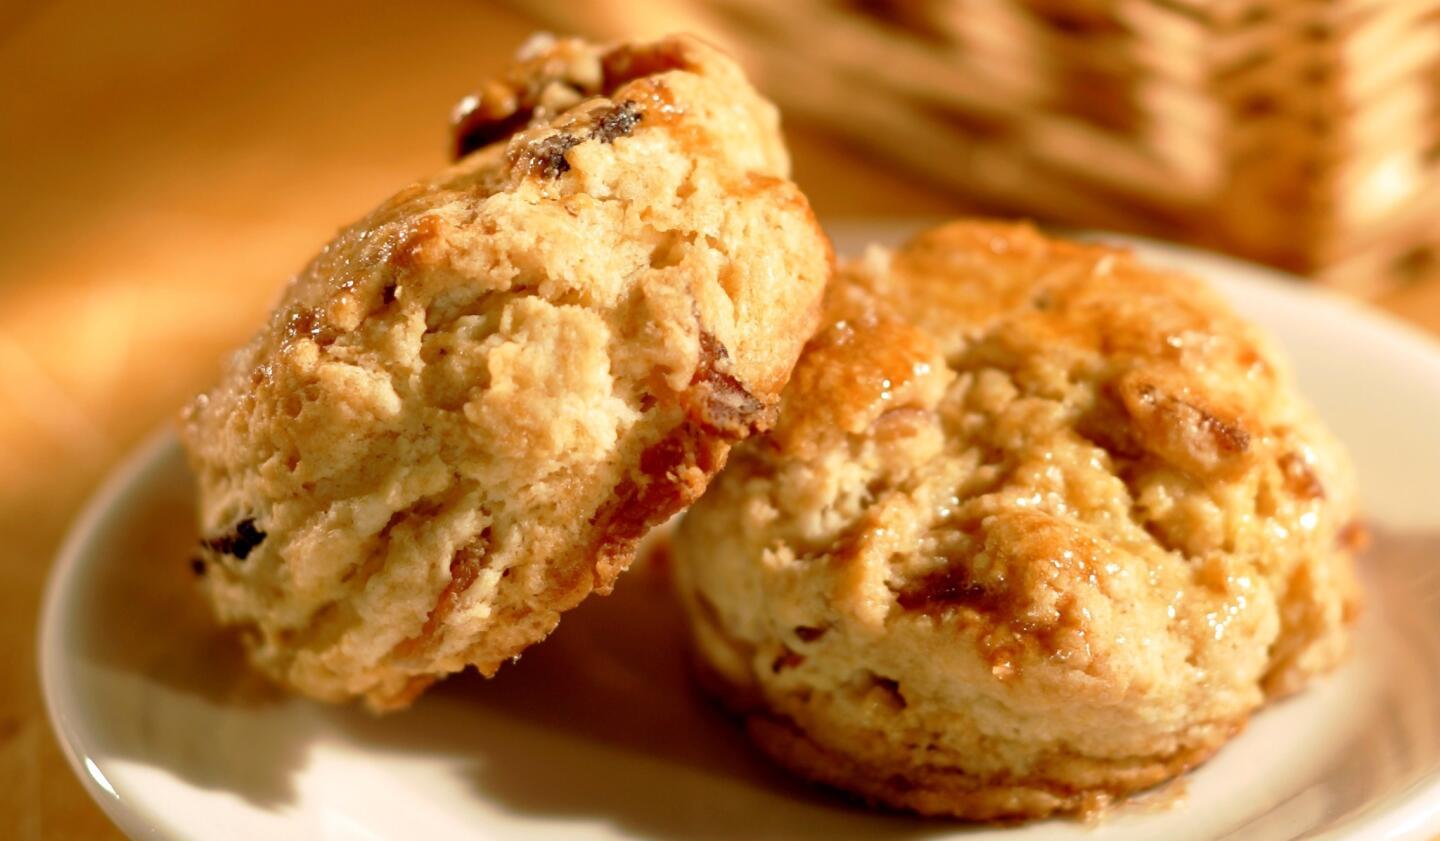 Maple bacon biscuits